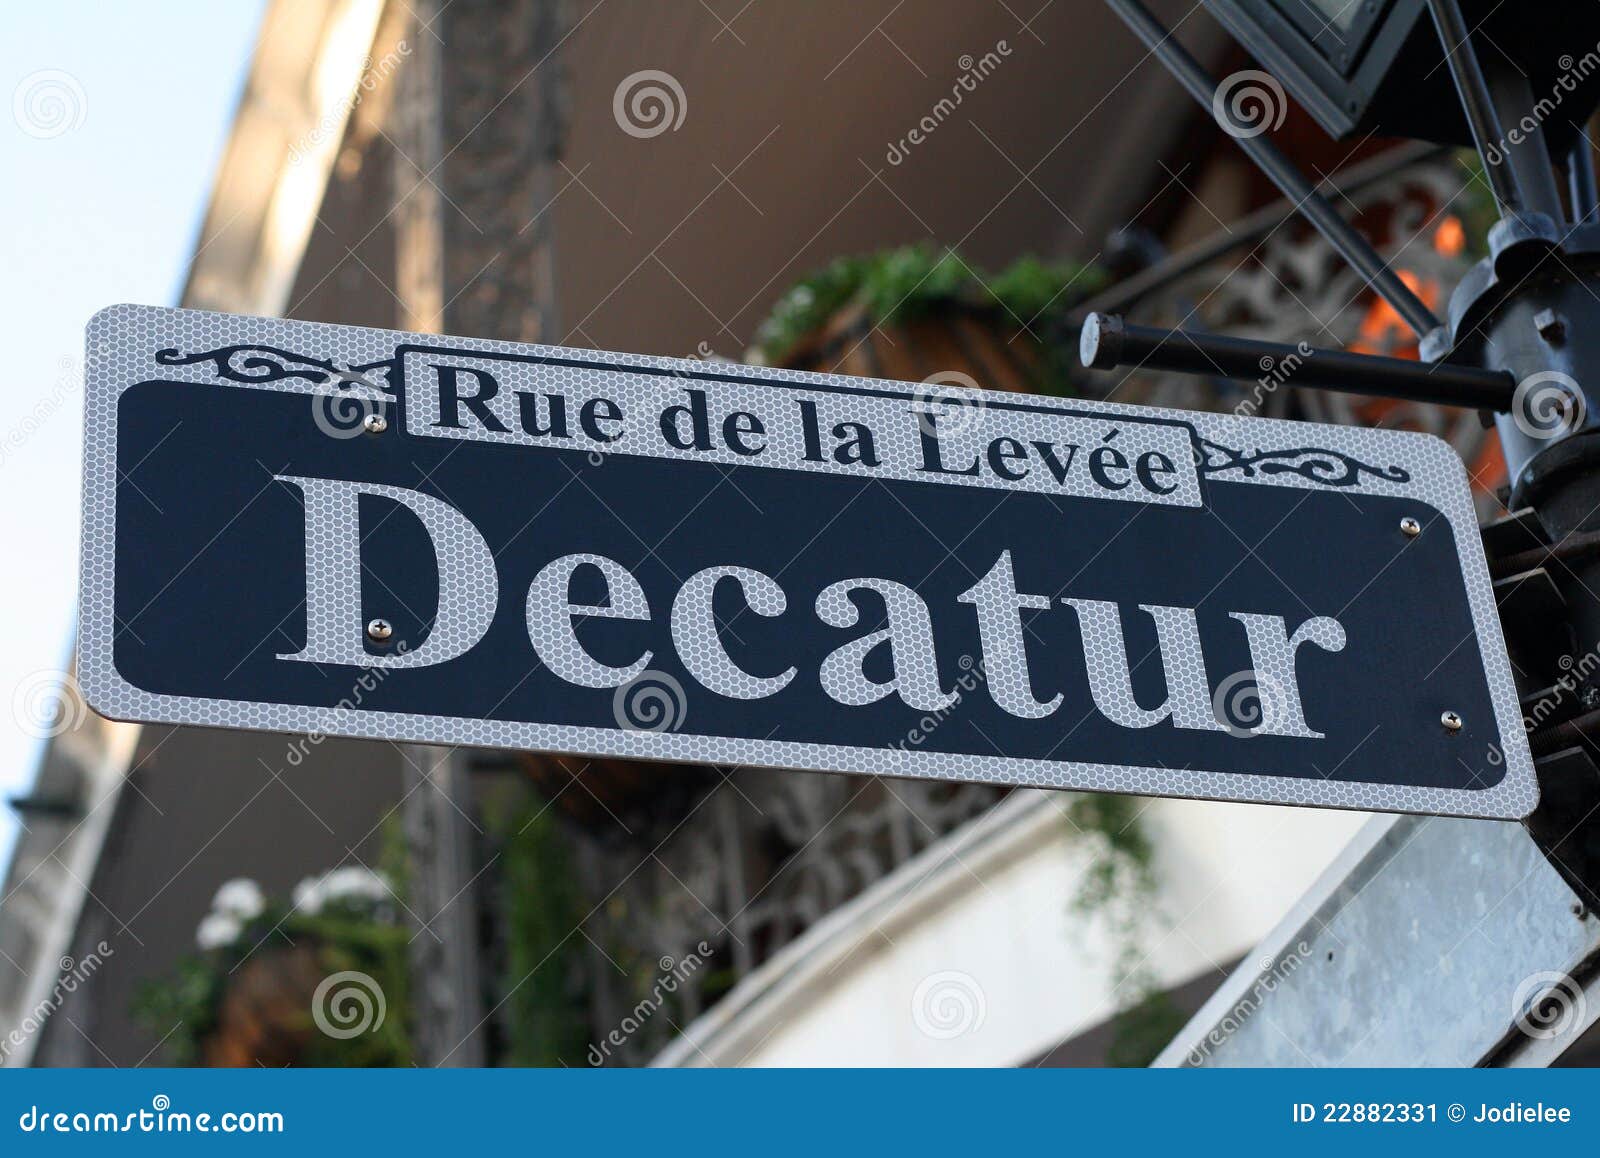 decatur street sign in new orleans